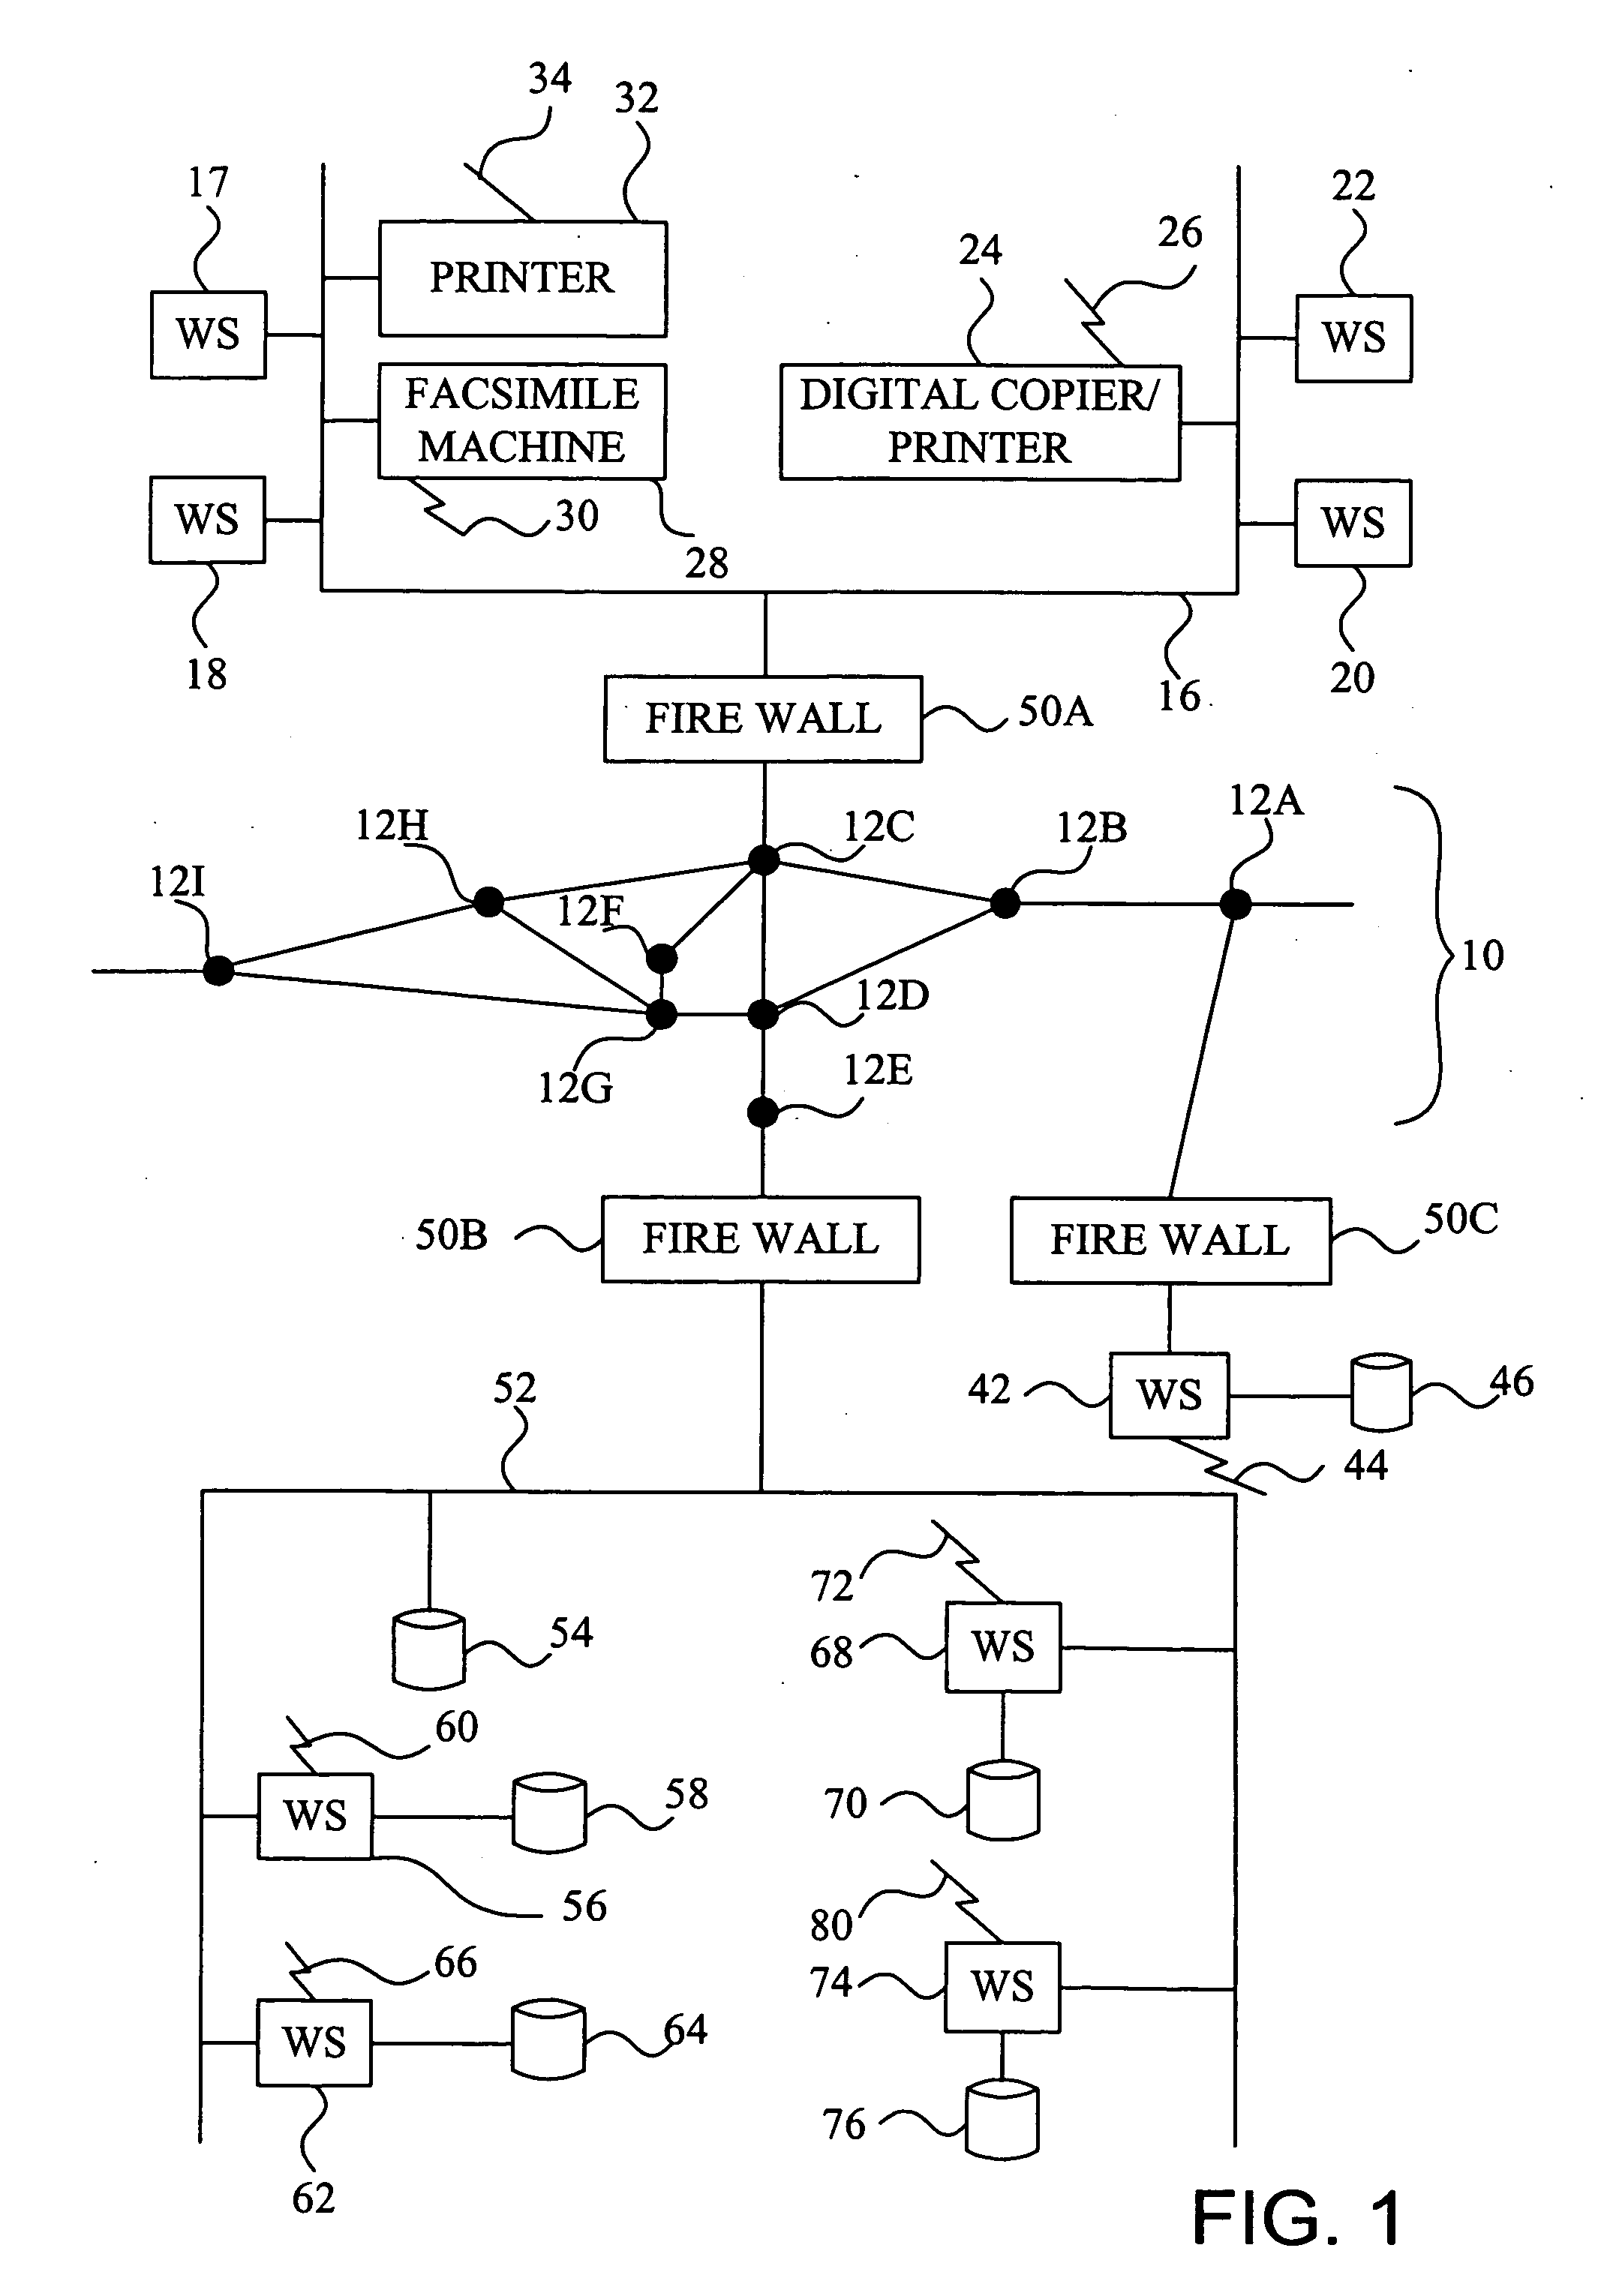 Method and system of remote monitoring and support of devices, using POP3 and decryption using virtual function